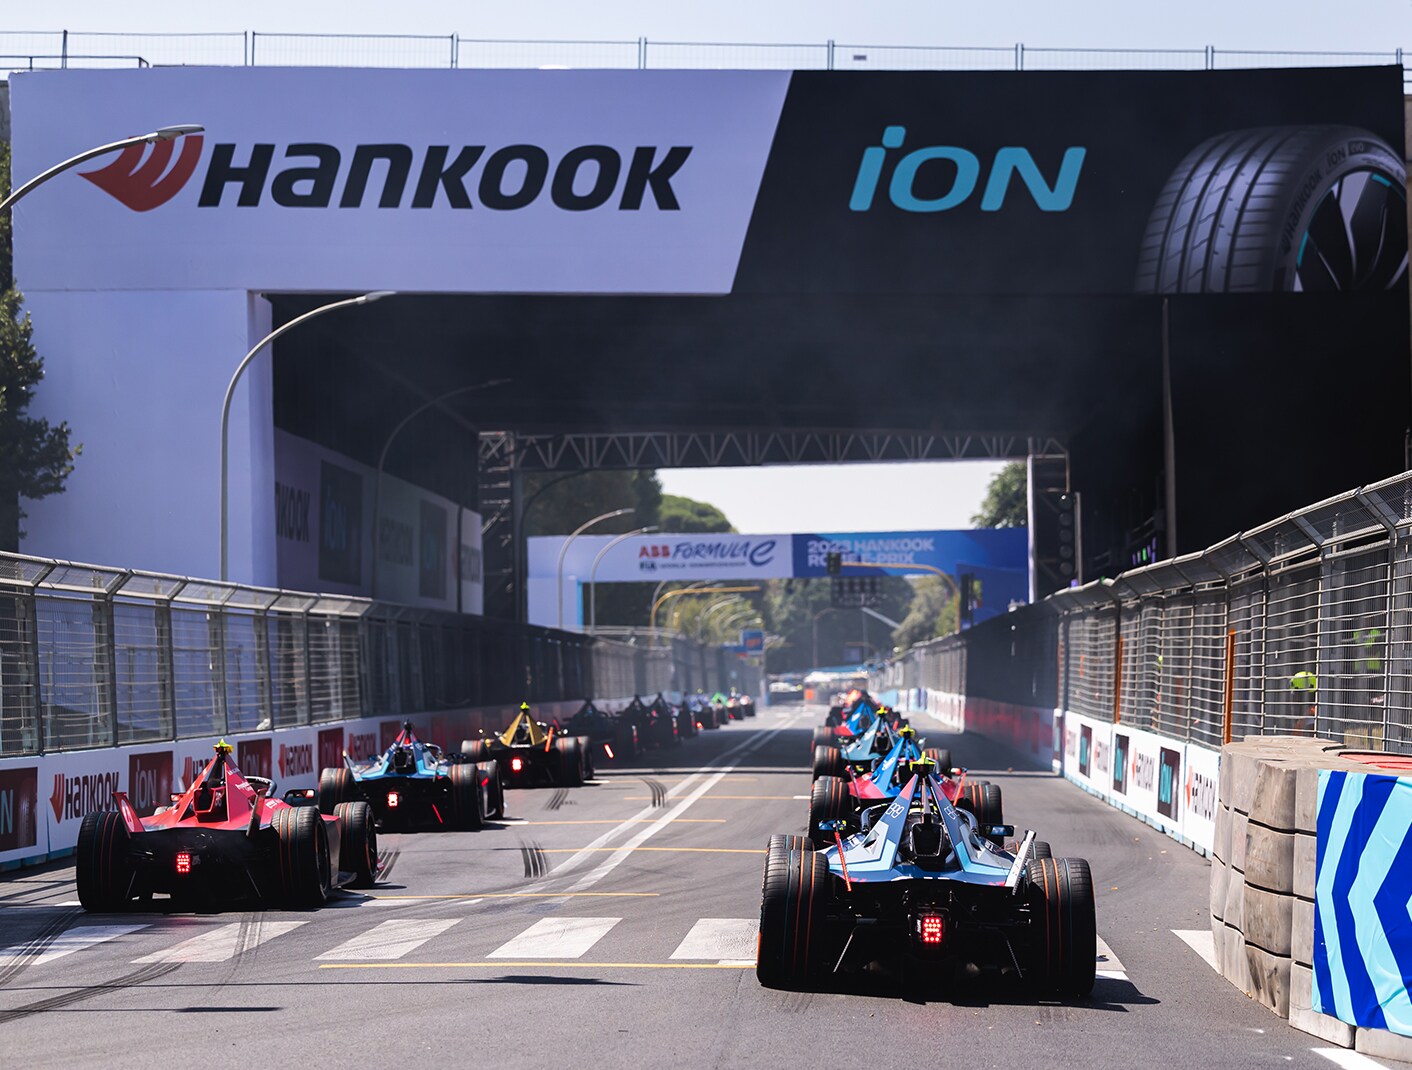 Back on track: Hankook and Formula E kick off Season 10 with the official test in Valencia